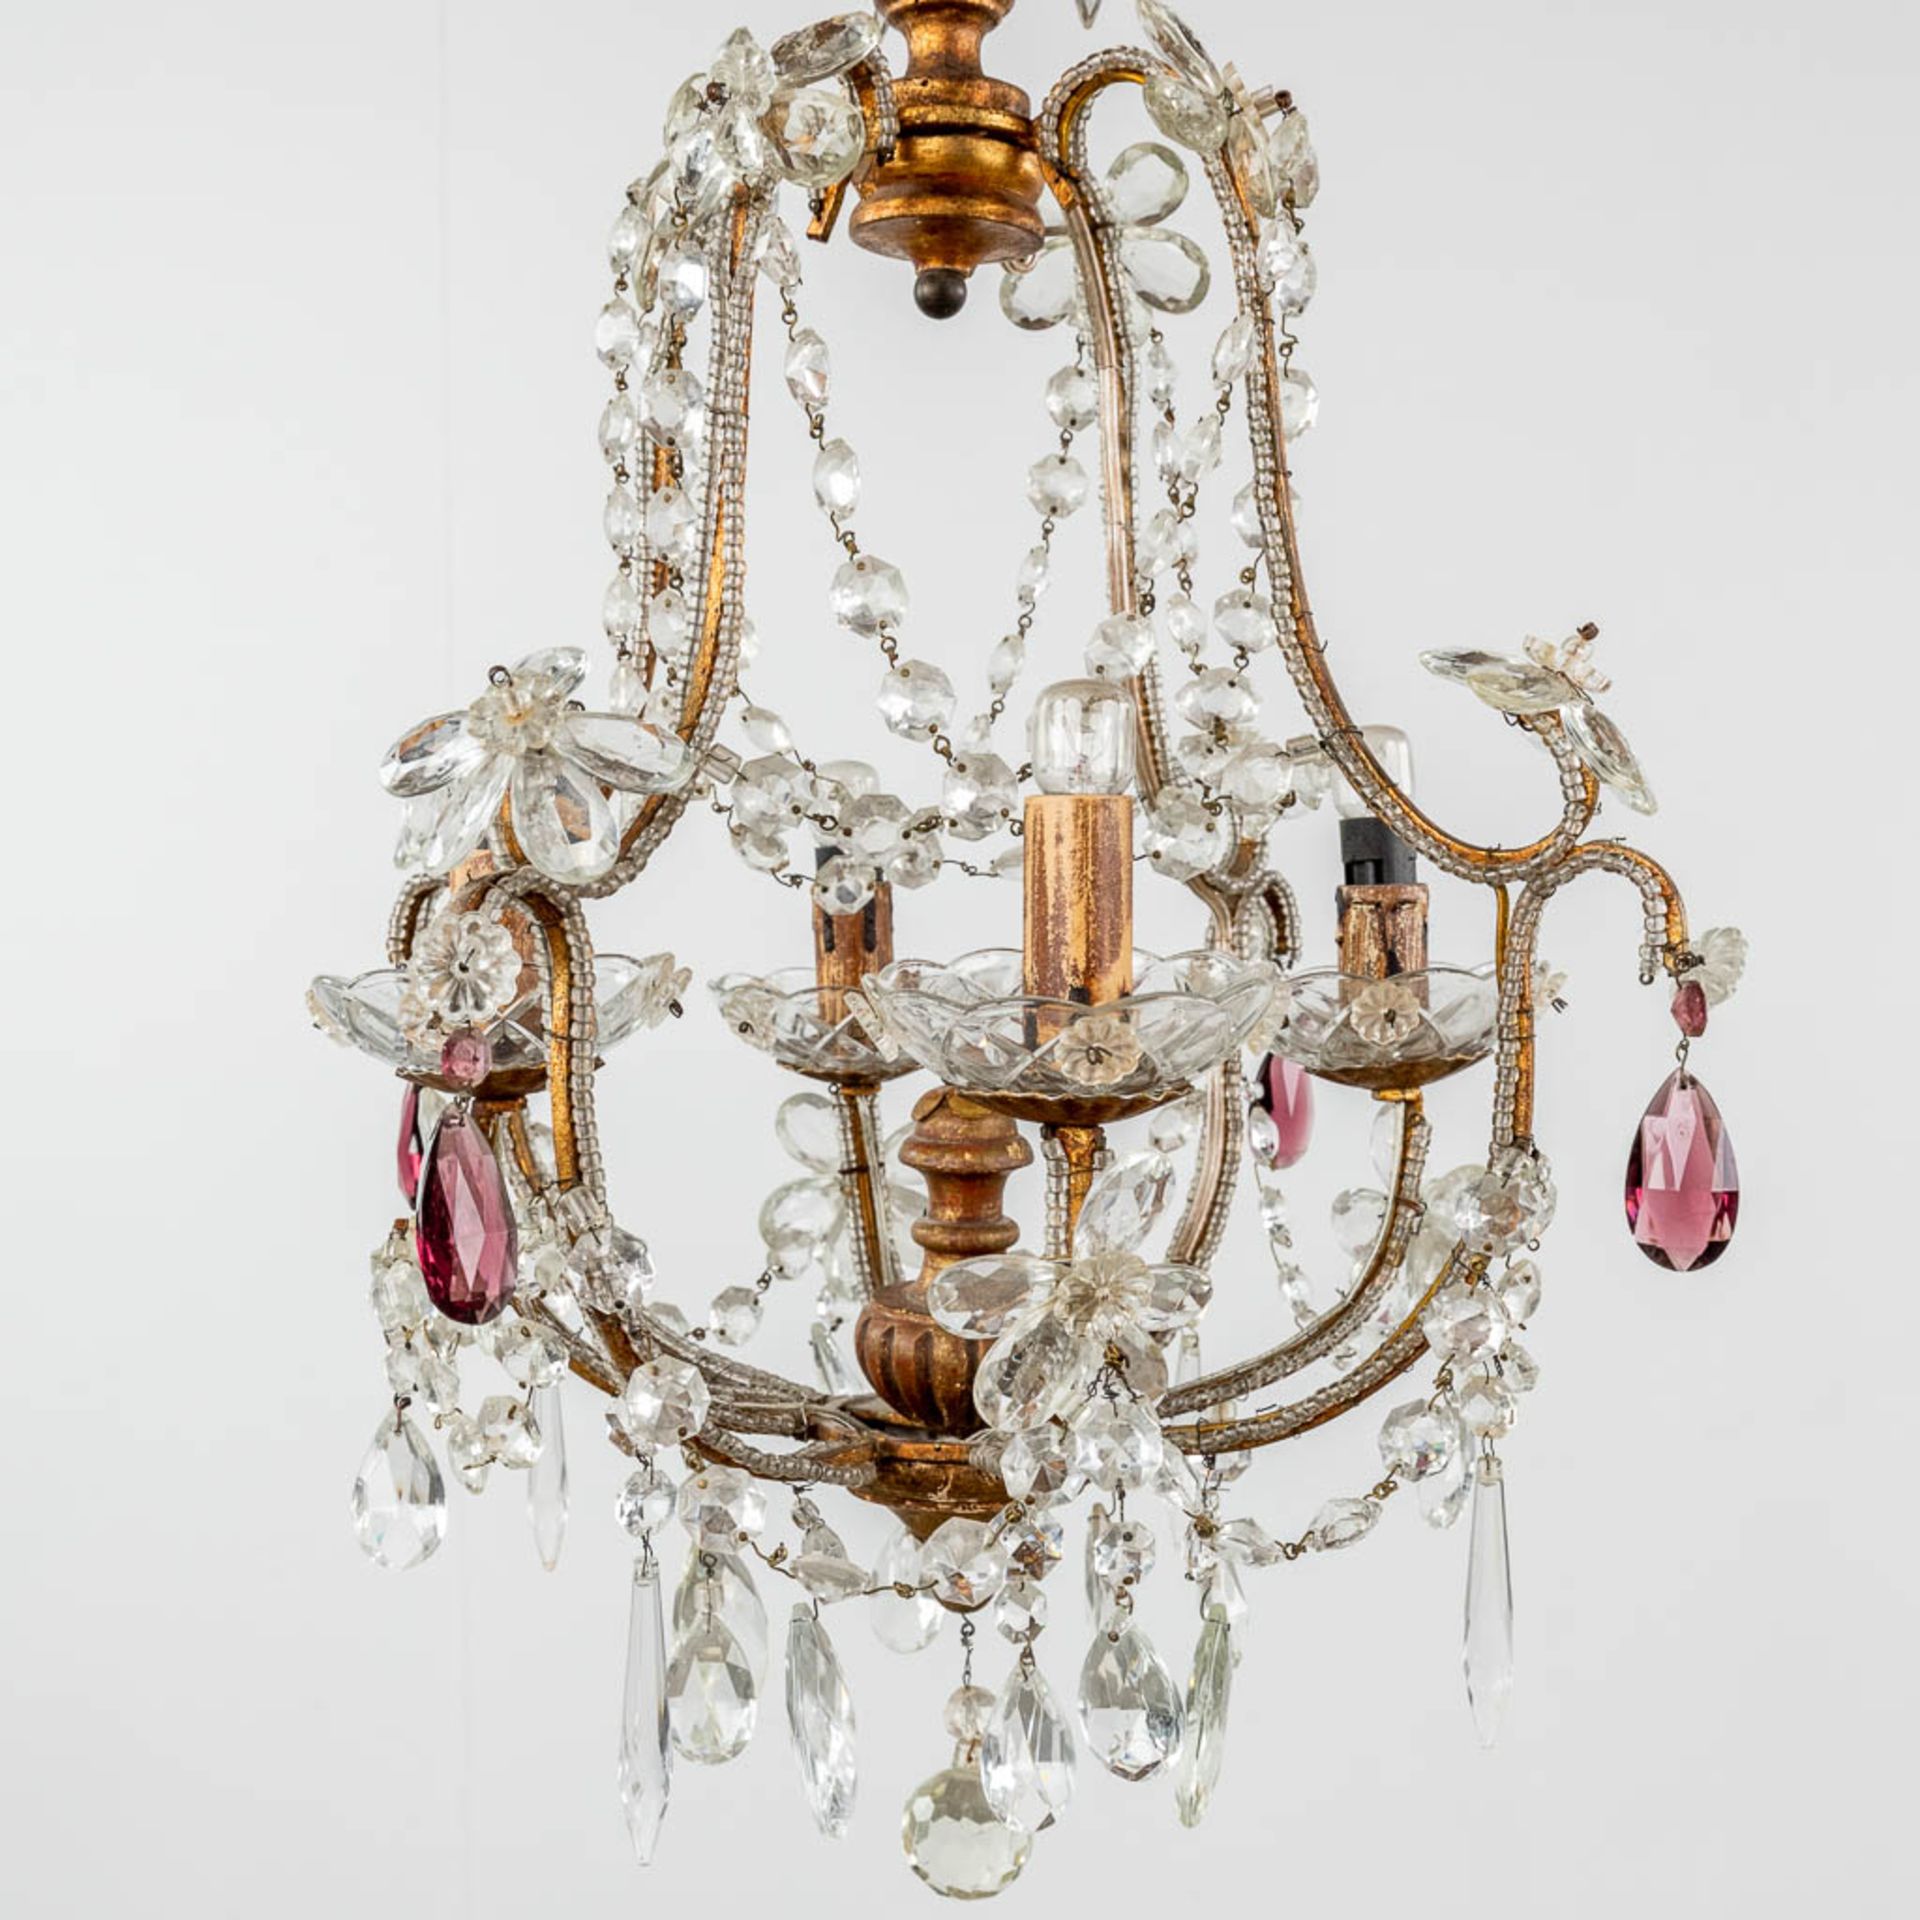 A decorative chandelier, brass and coloured glass. (H: 65 x D: 36 cm) - Image 3 of 10